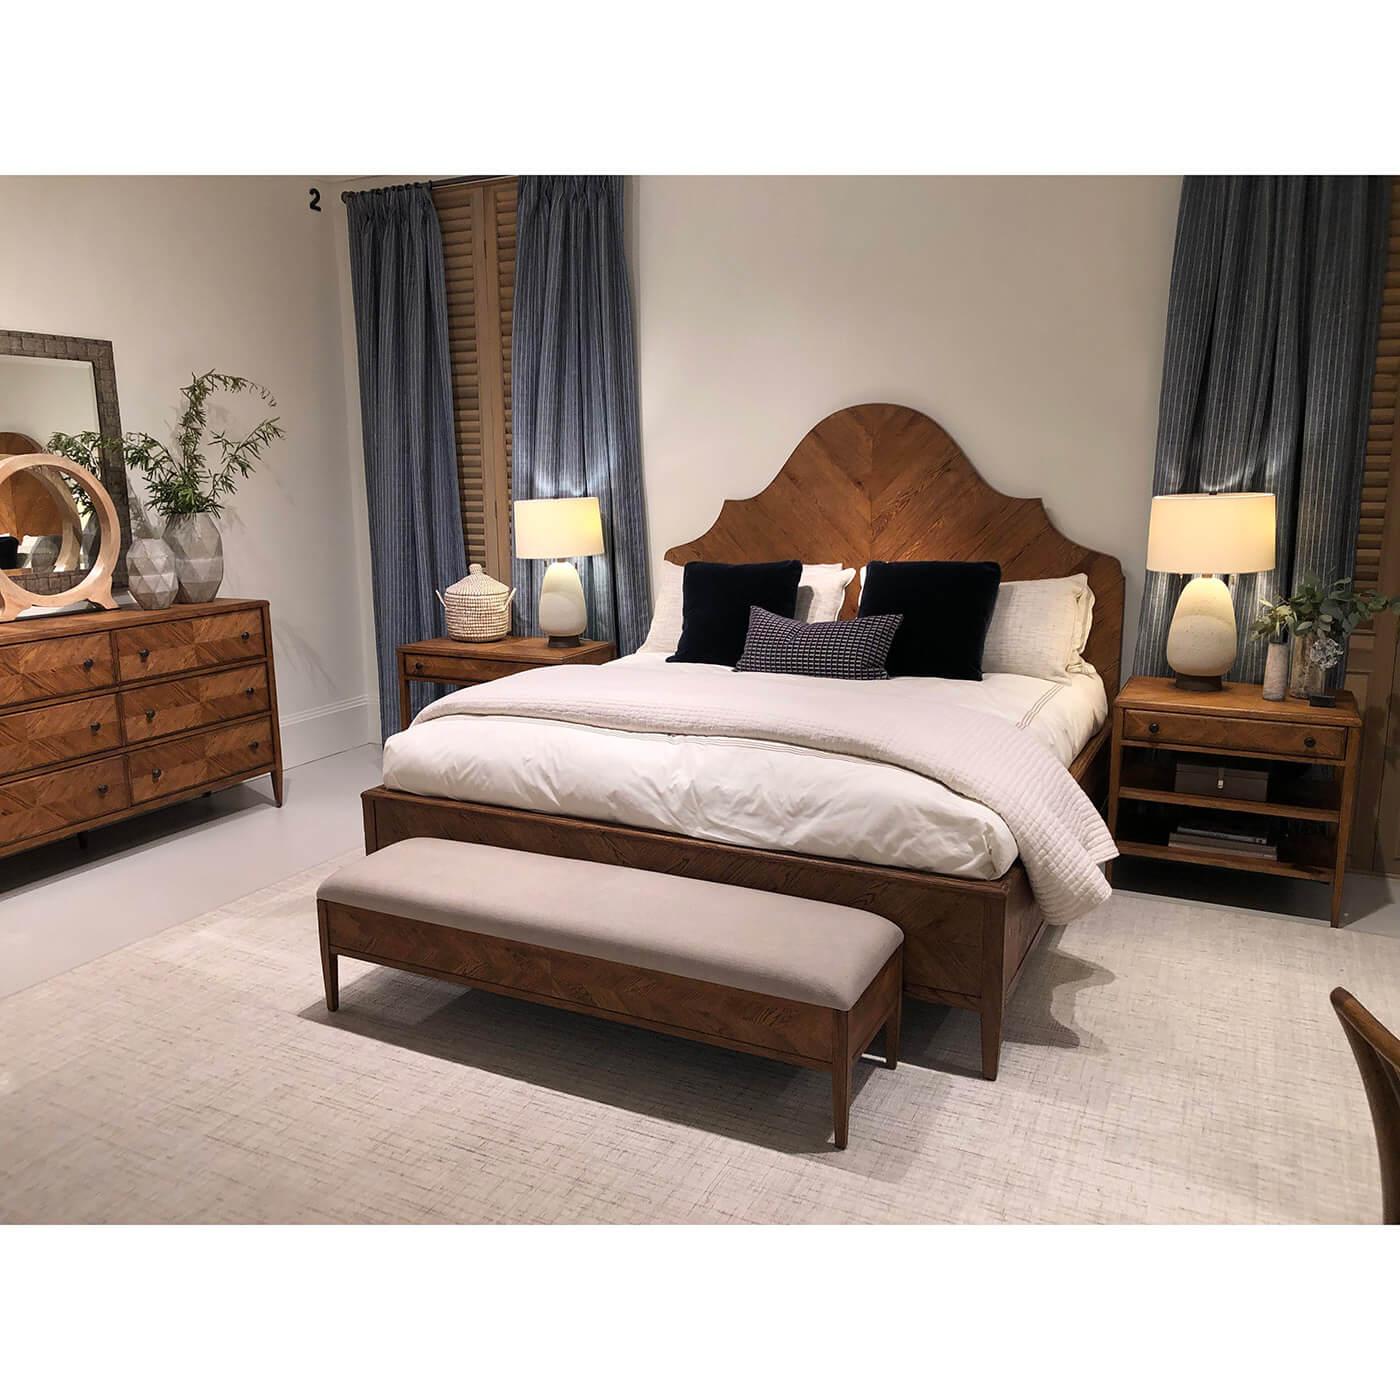 Modern Rustic Oak King Bed, Dark In New Condition For Sale In Westwood, NJ